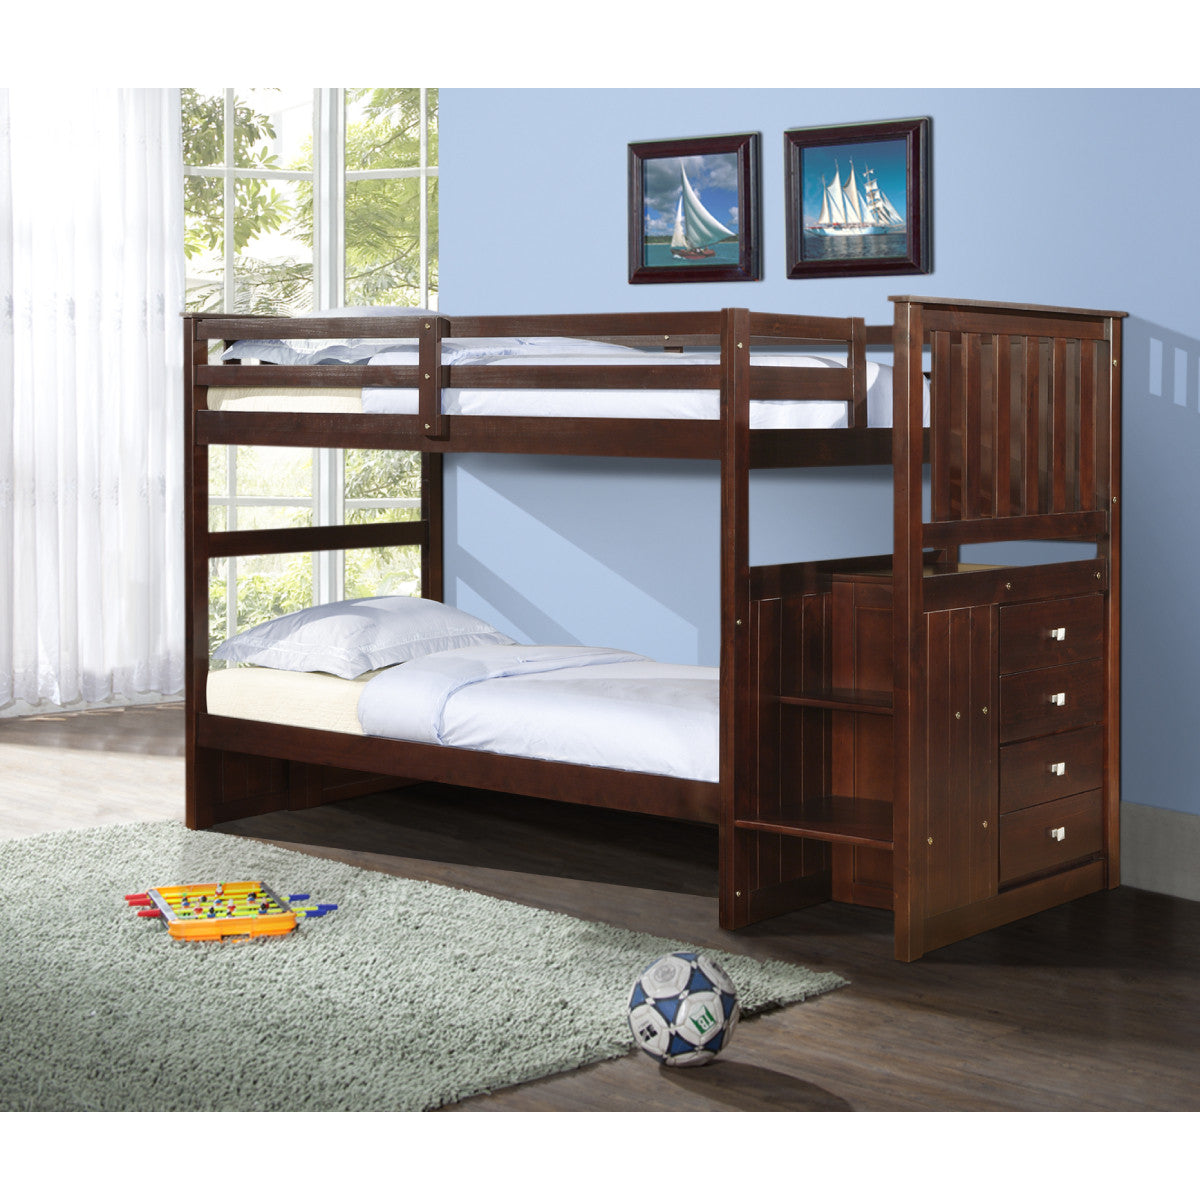 MISSION STAIRWAY BUNKBED CAPPUCCINO